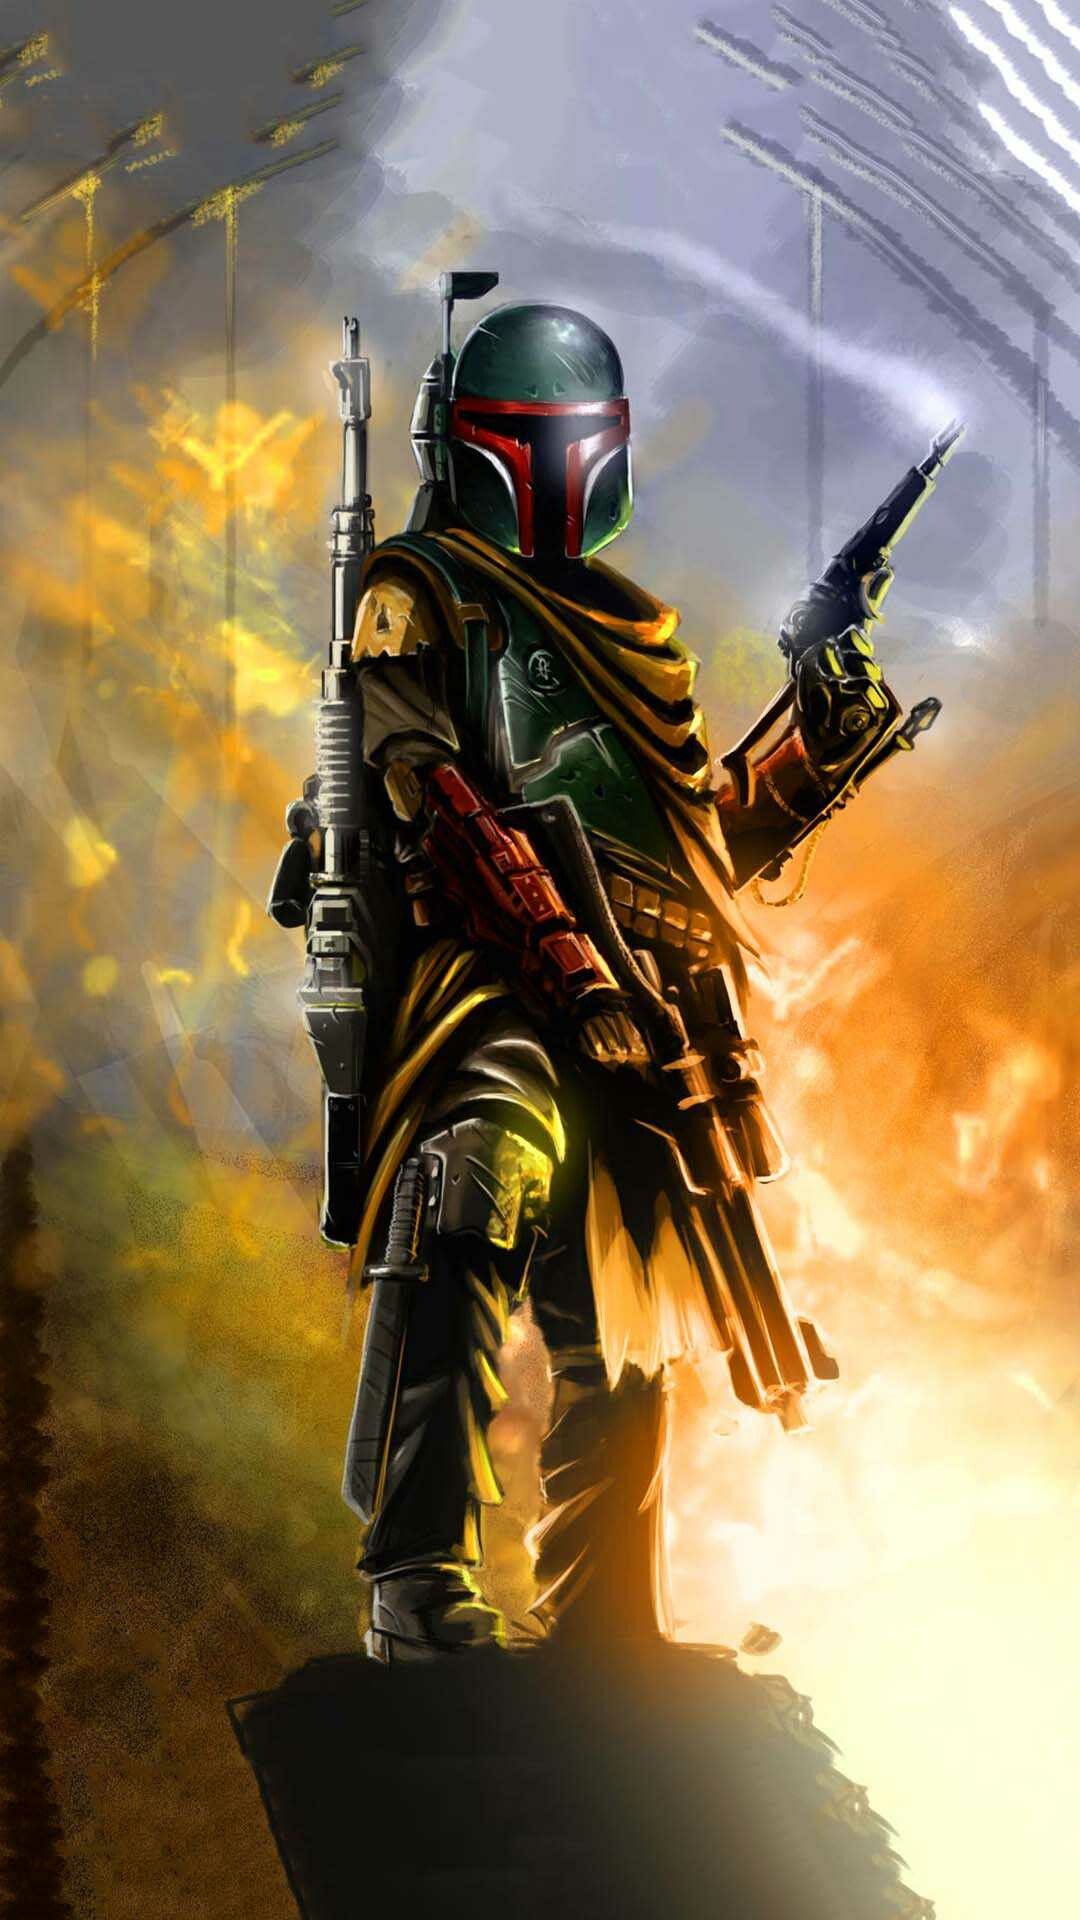 The Book of Boba Fett: The character appearing in many forms of Star Wars media outside of the films. 1080x1920 Full HD Wallpaper.